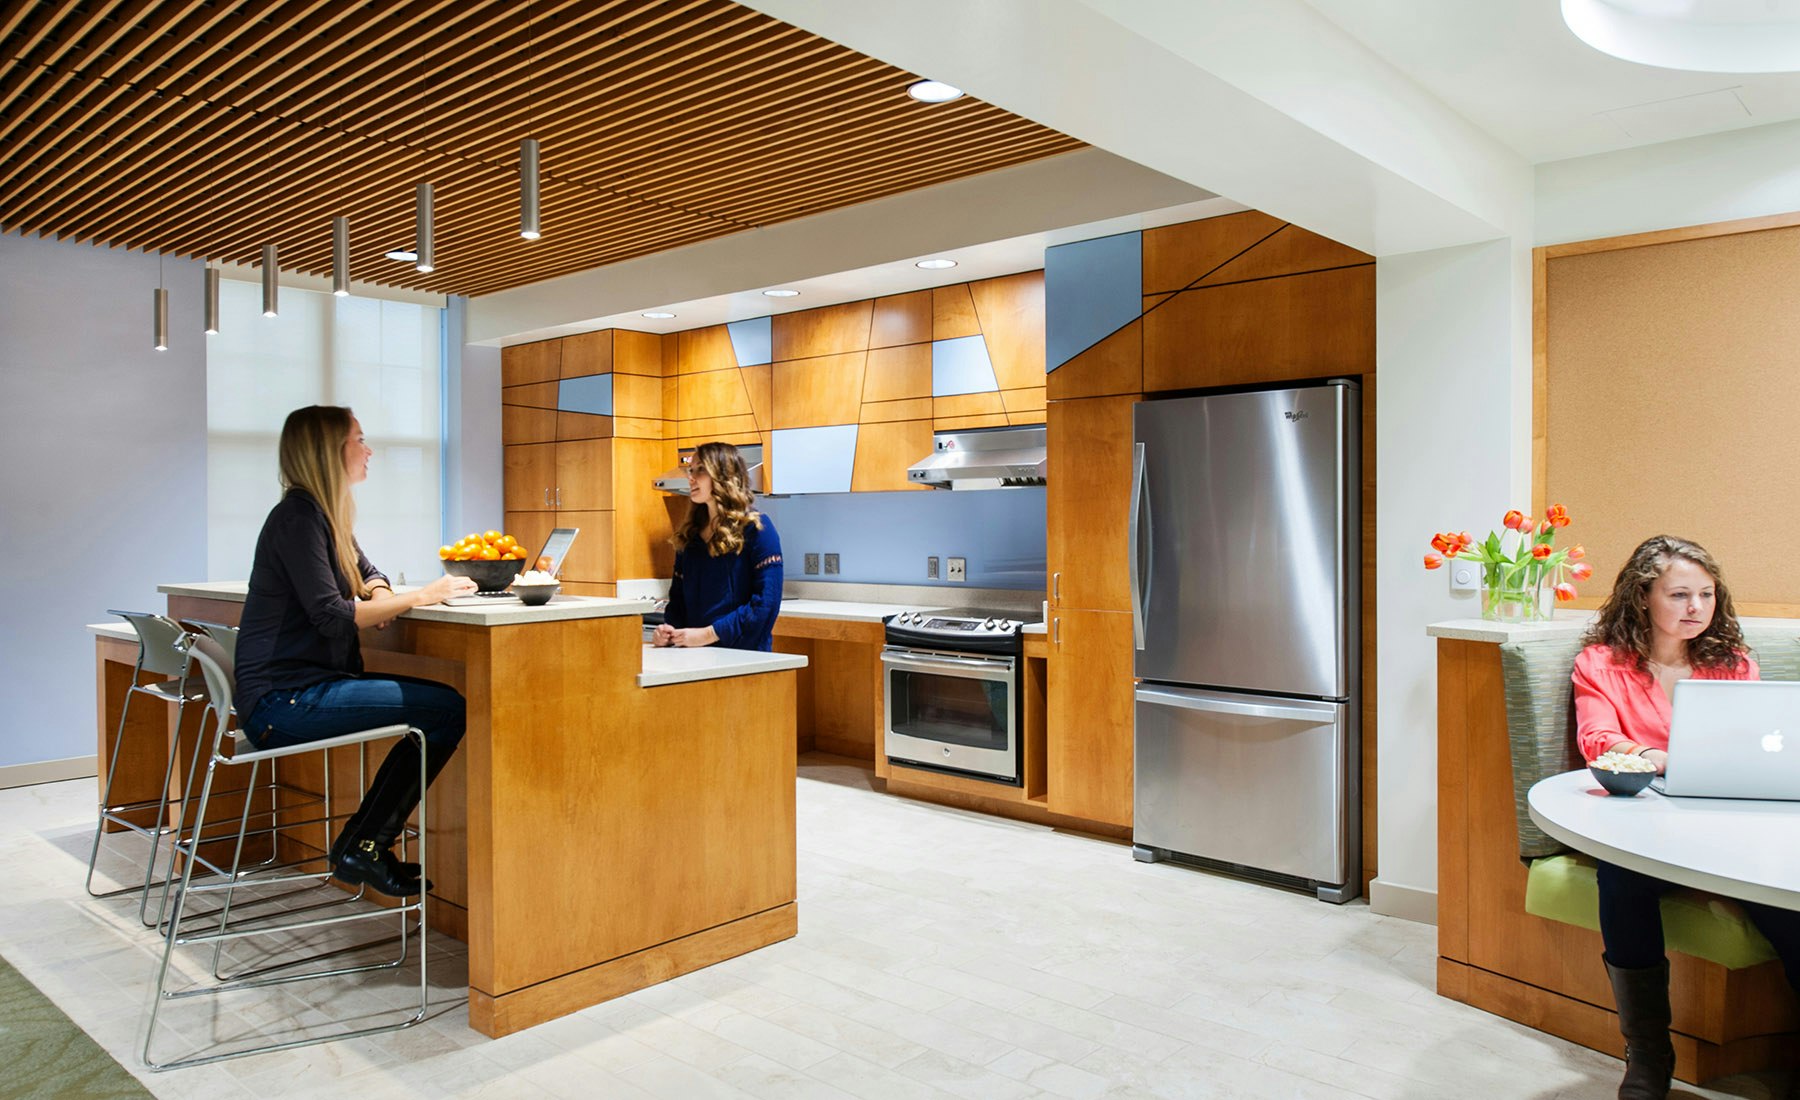 With open and connected lounge, kitchen, laundry and study space, the building’s common spaces inspire students to socialize, study, collaborate, and form bonds that expand beyond the independent sororities. 